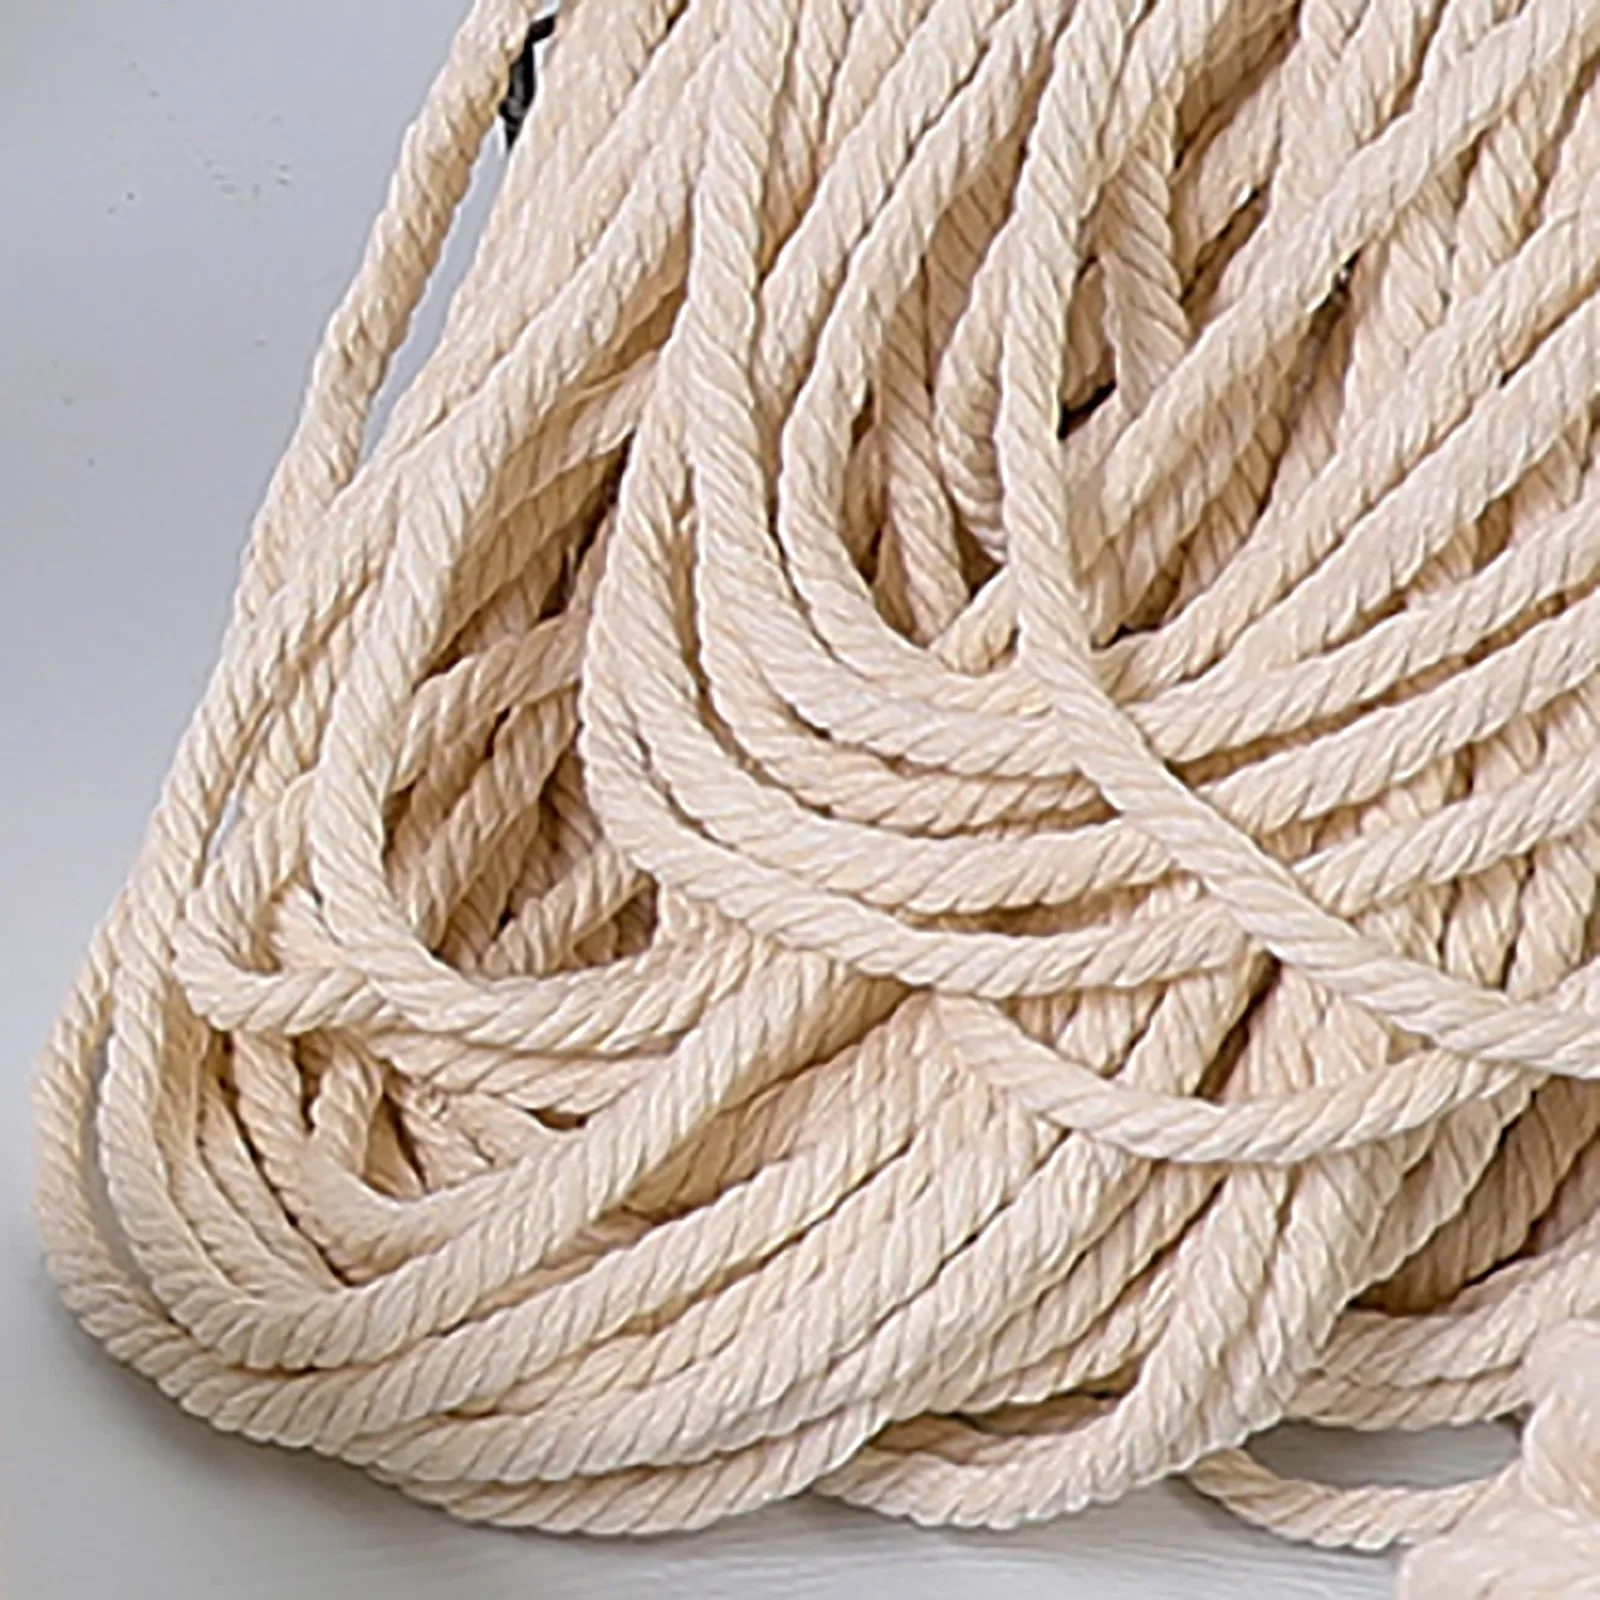 new fiy 3mm x 300m Cotton Rope Multi-purpose Creative Diy Cotton Rope Strands Twisted Macrame Cotton Cord for Wall Hanging Craft